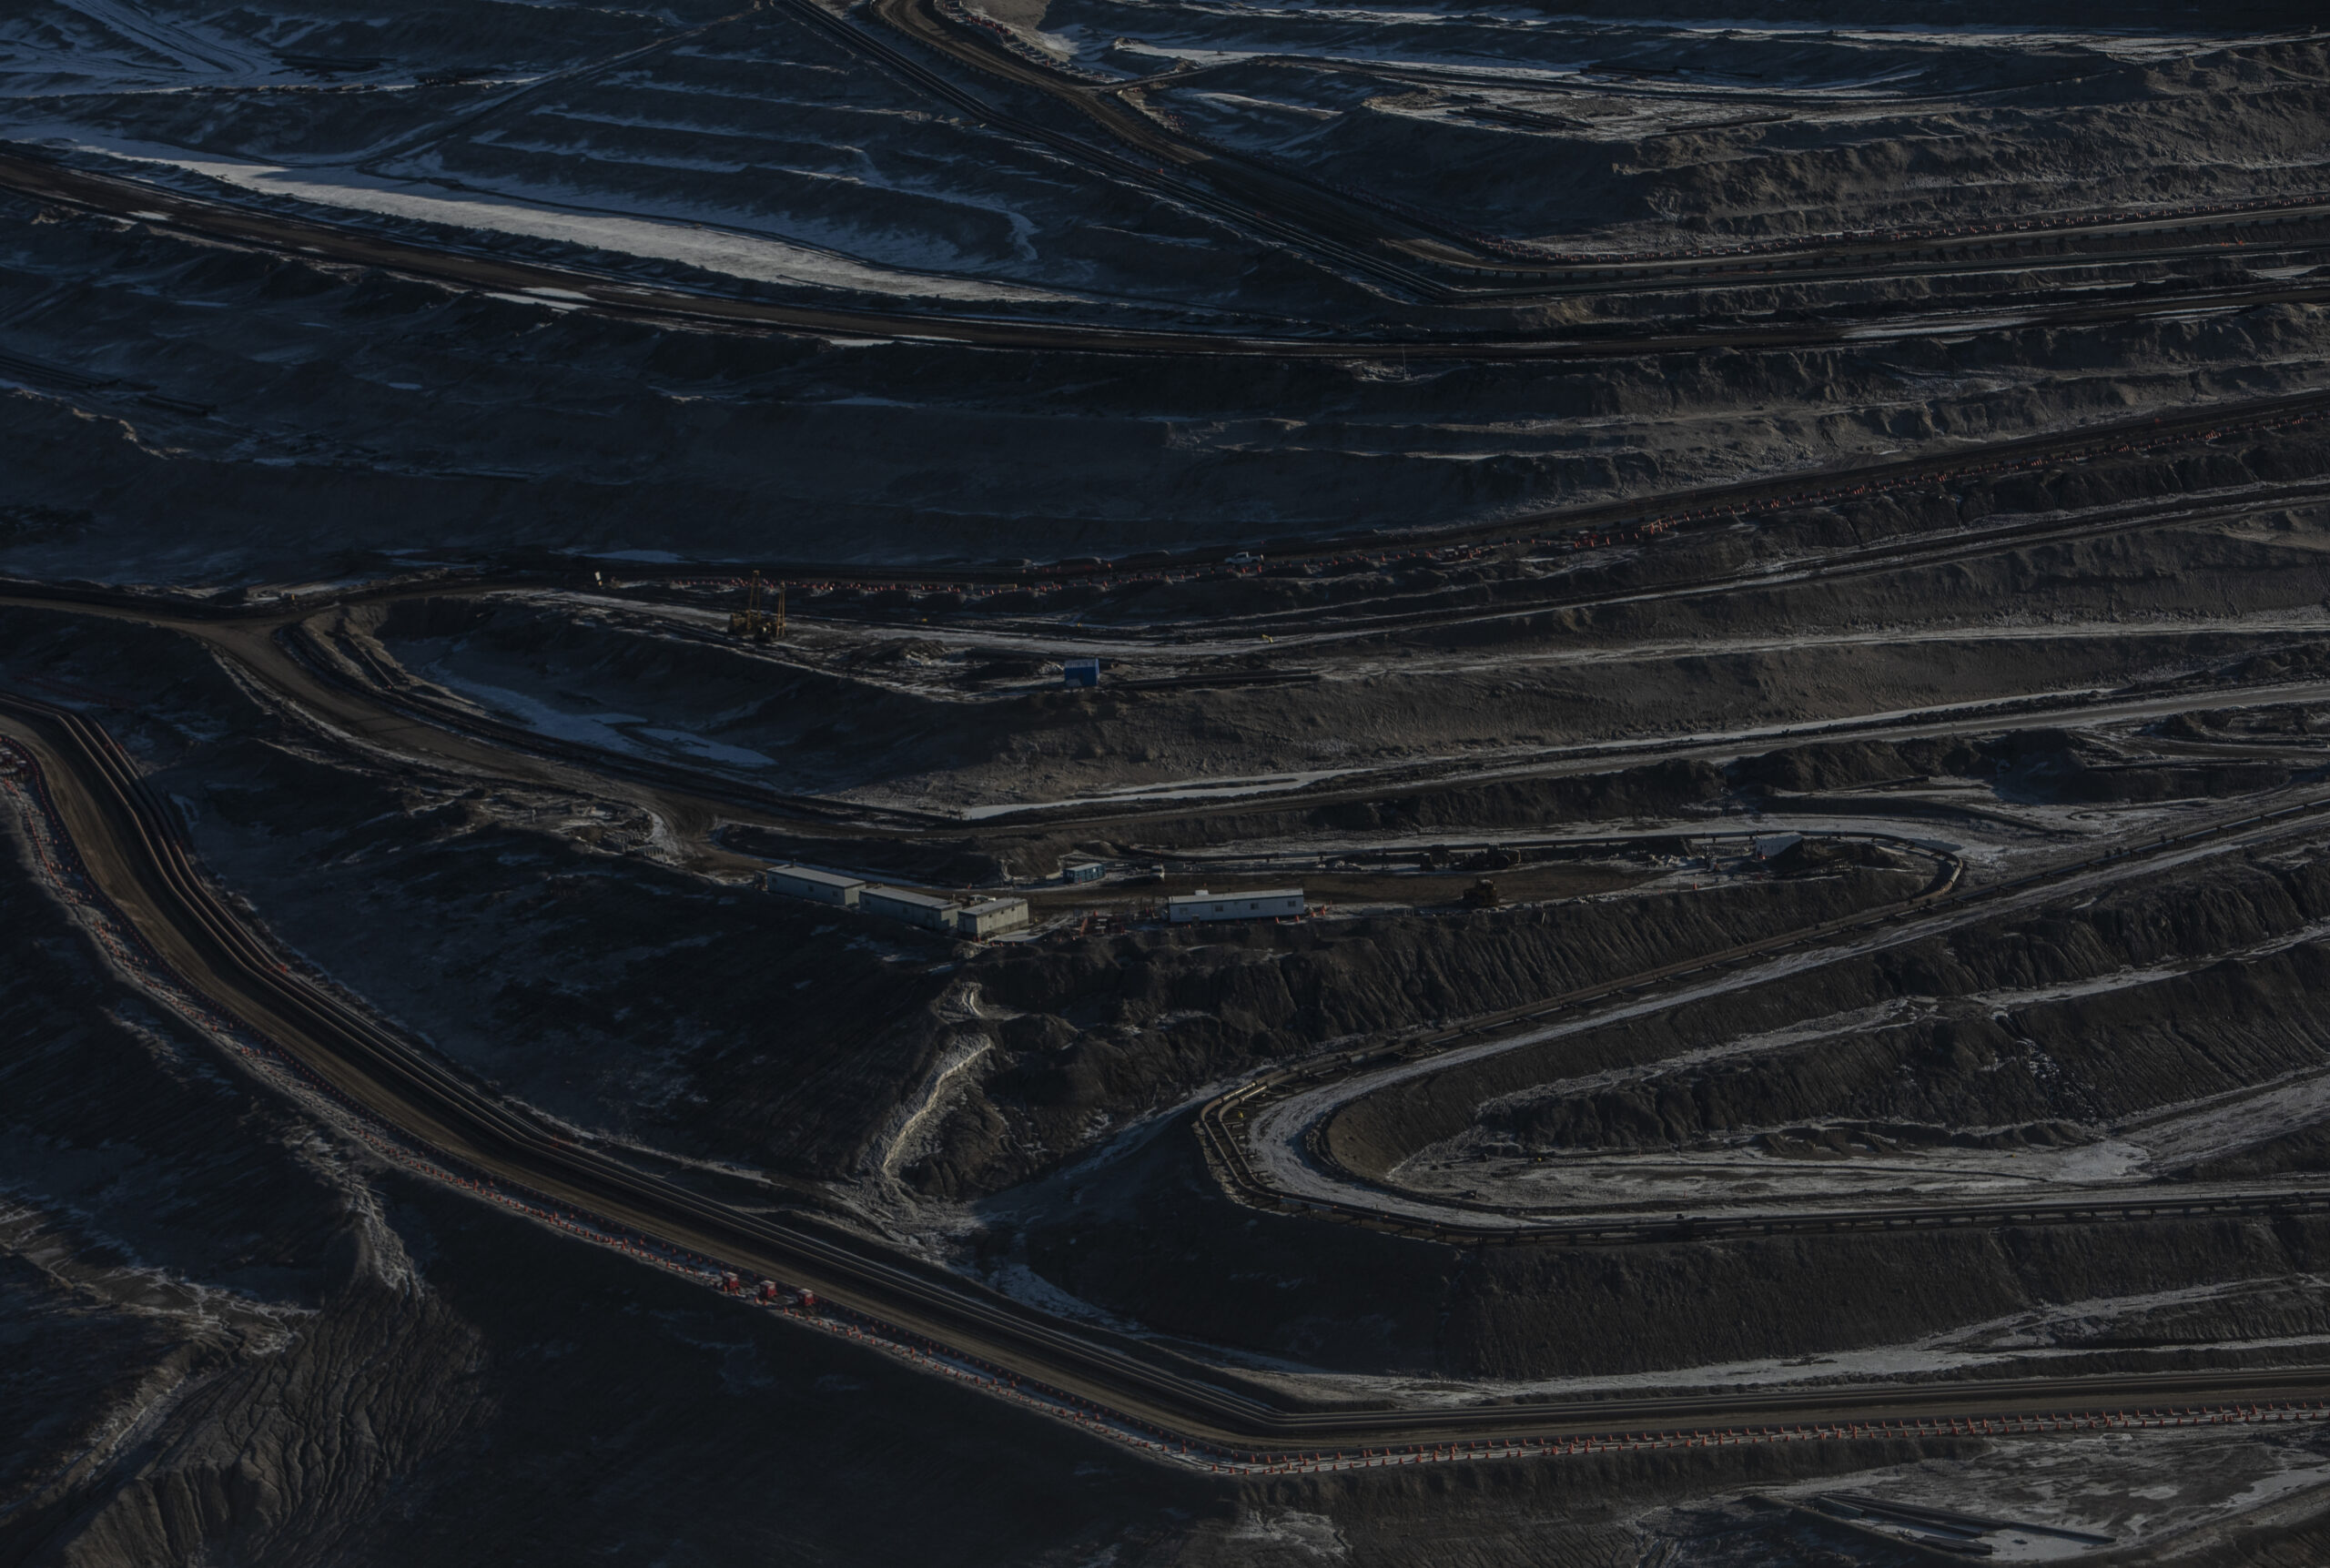 Aerial shot of the oilsands in Alberta.